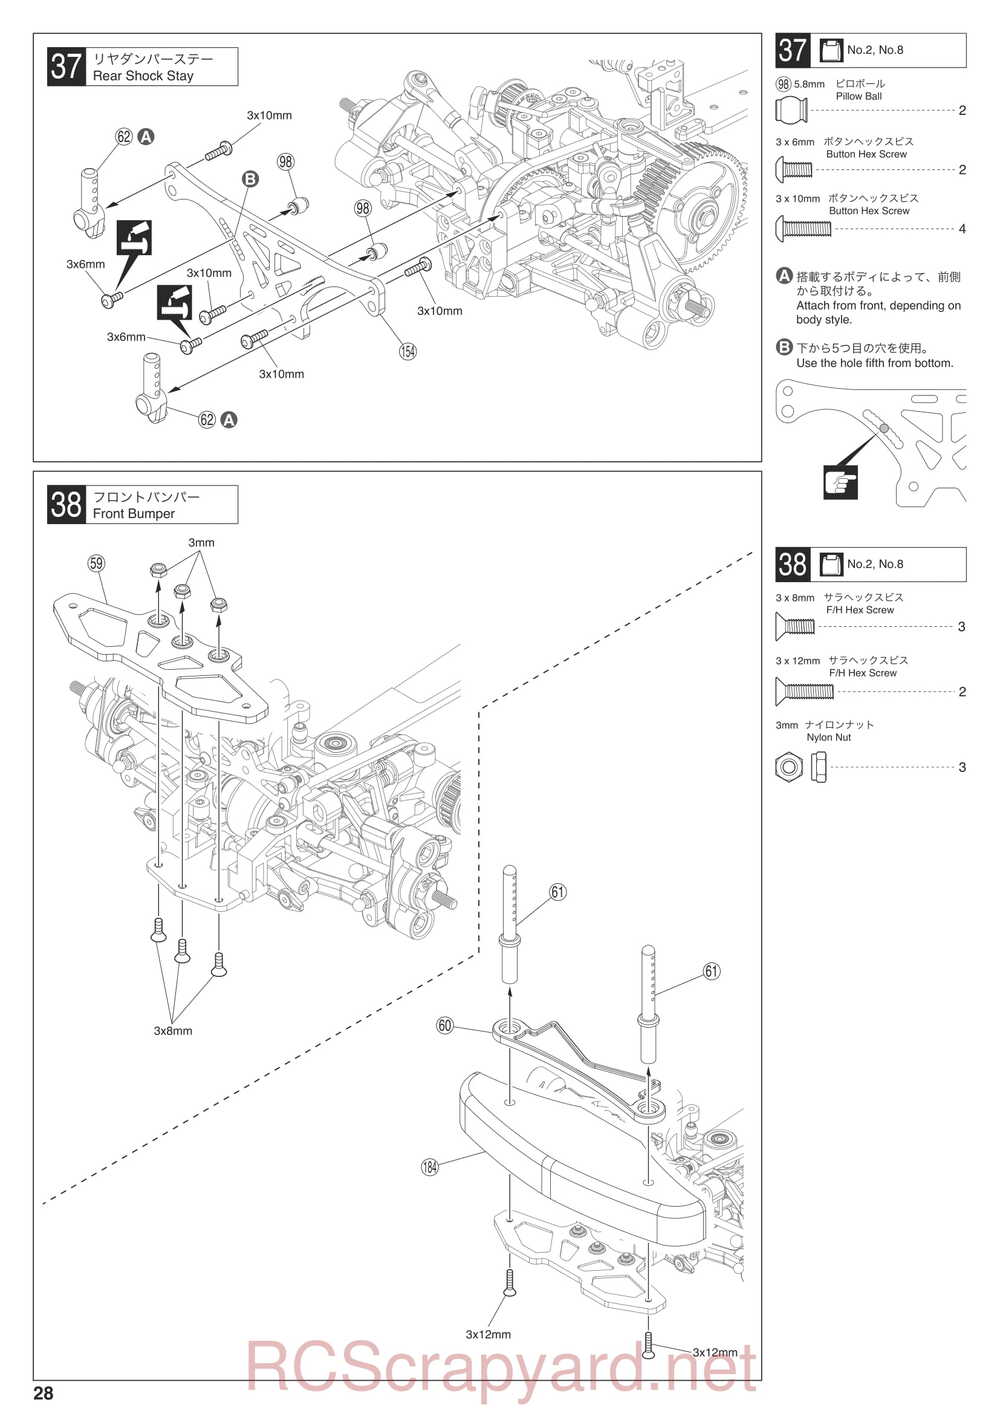 Kyosho - 31265 - V-ONE-R4 - Manual - Page 28